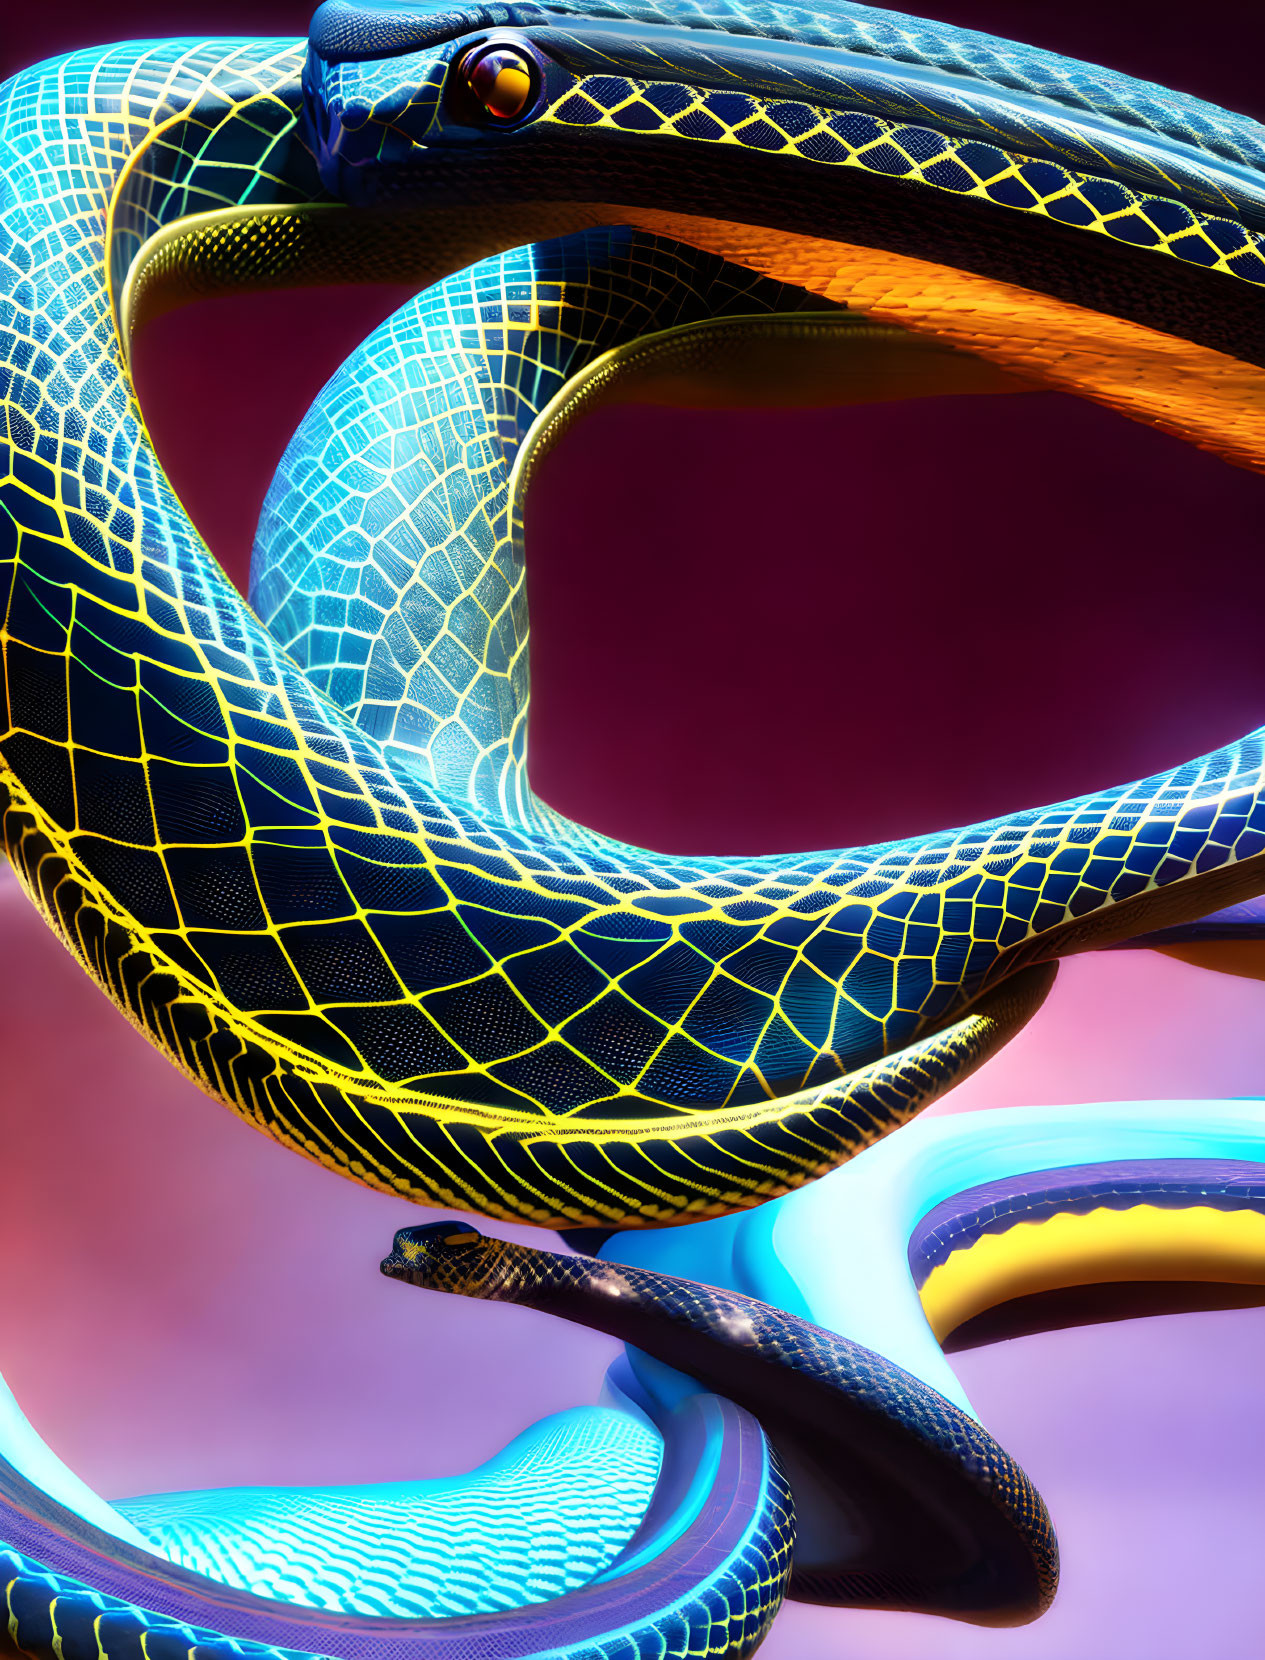 Neon blue and yellow snake digital art on pink and purple background